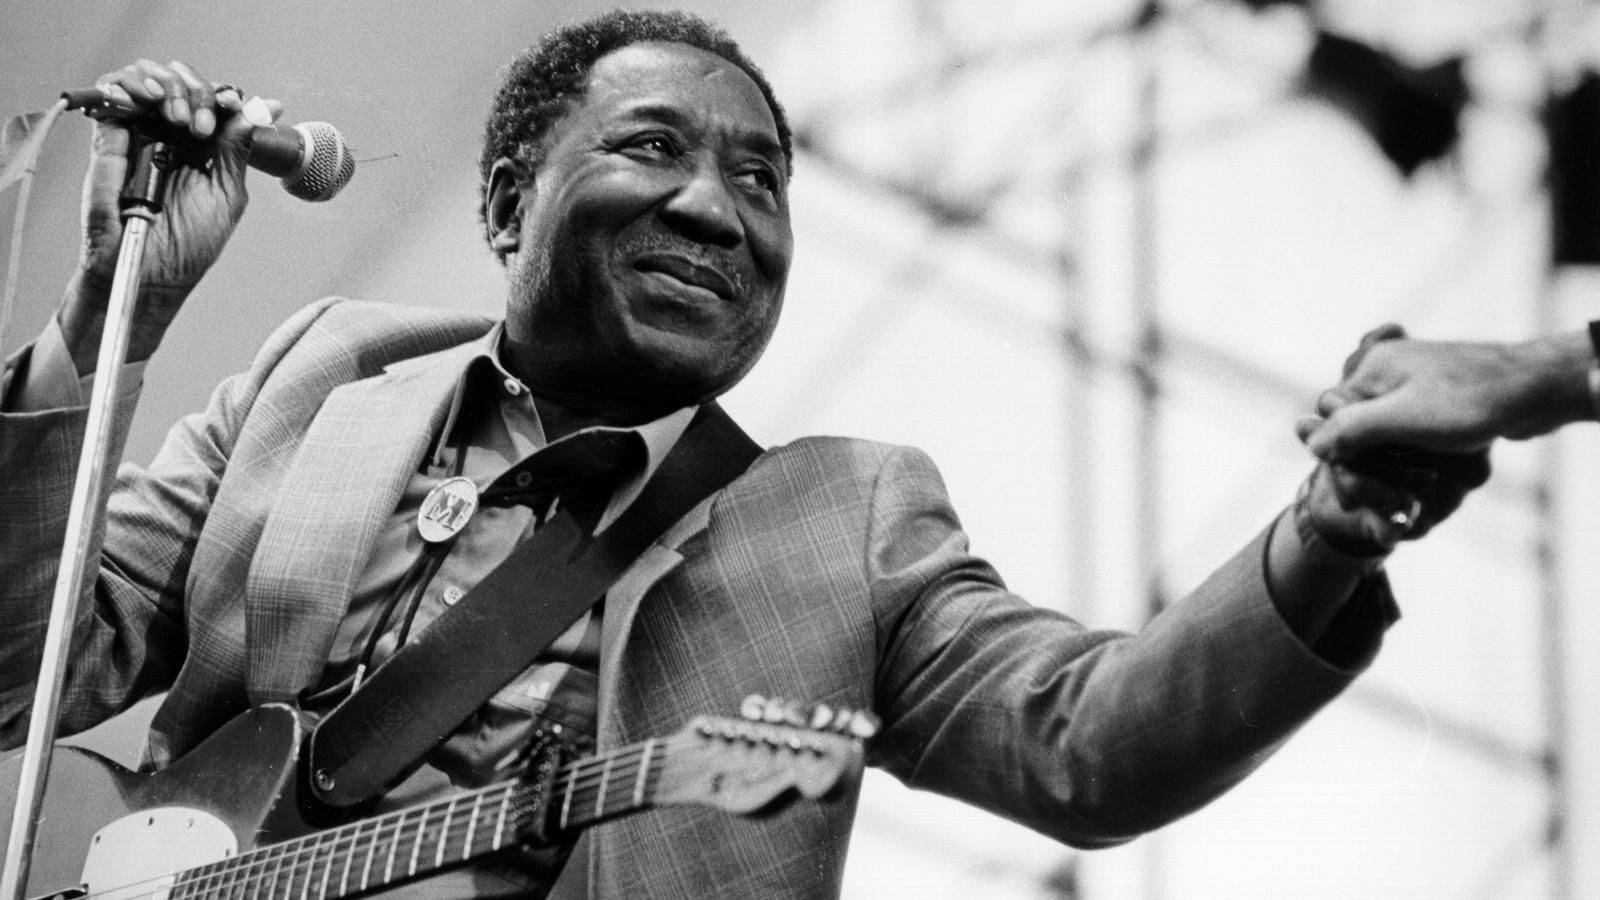 Muddy Waters Performing Live in Concert, 1970. Wallpaper